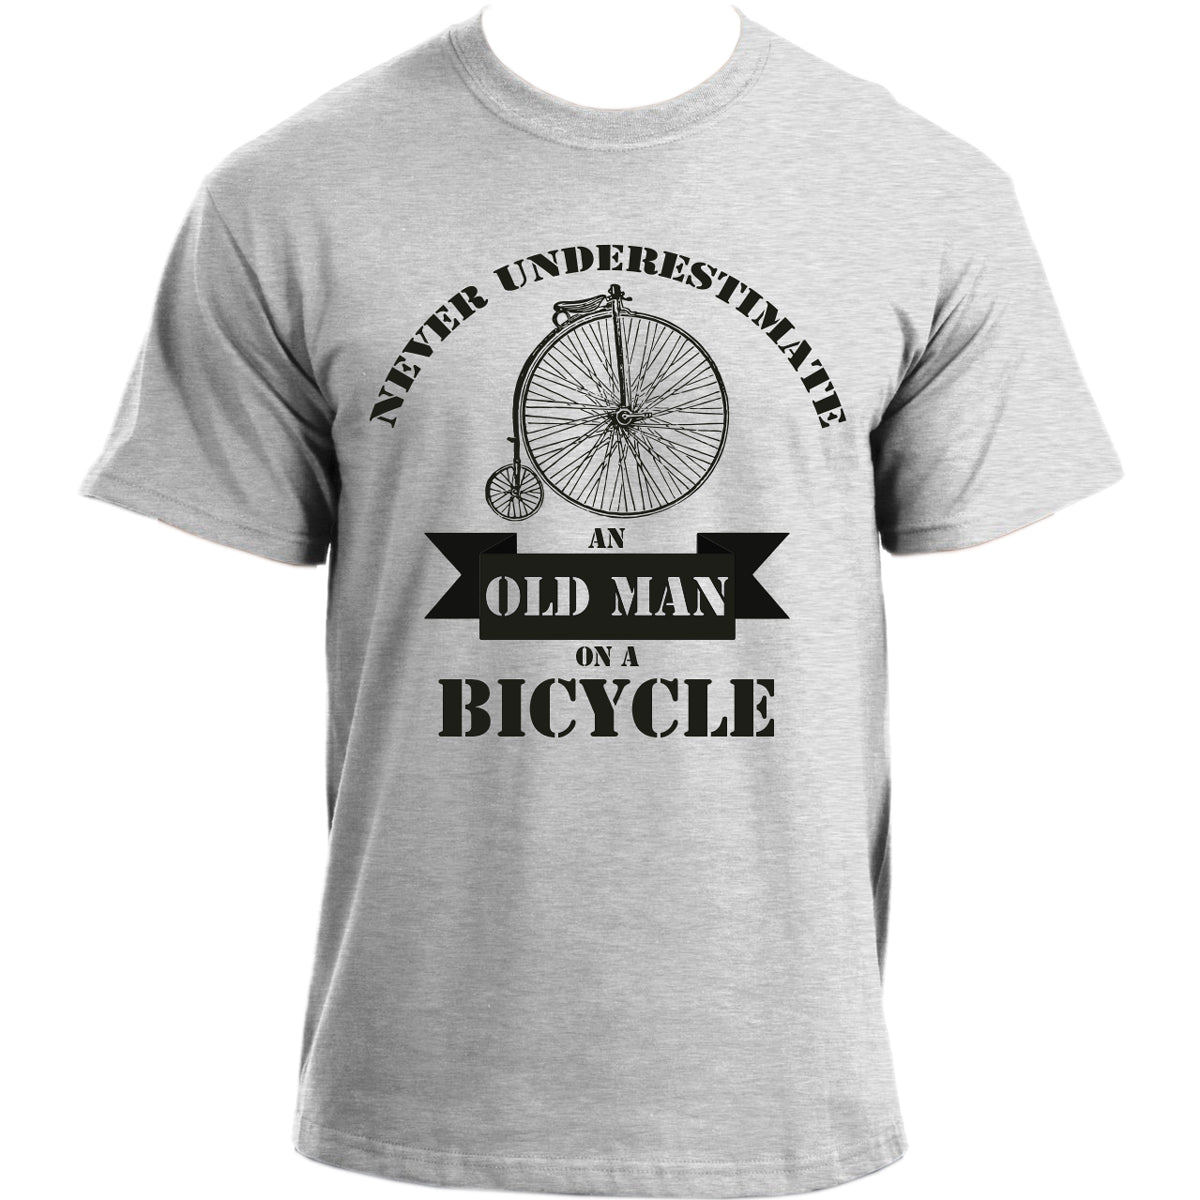 Never Underestimate An Old Man on a Bicycle Funny Cyclist T-shirt For Men I Cycling Tee Bike Sports Top Tshirt